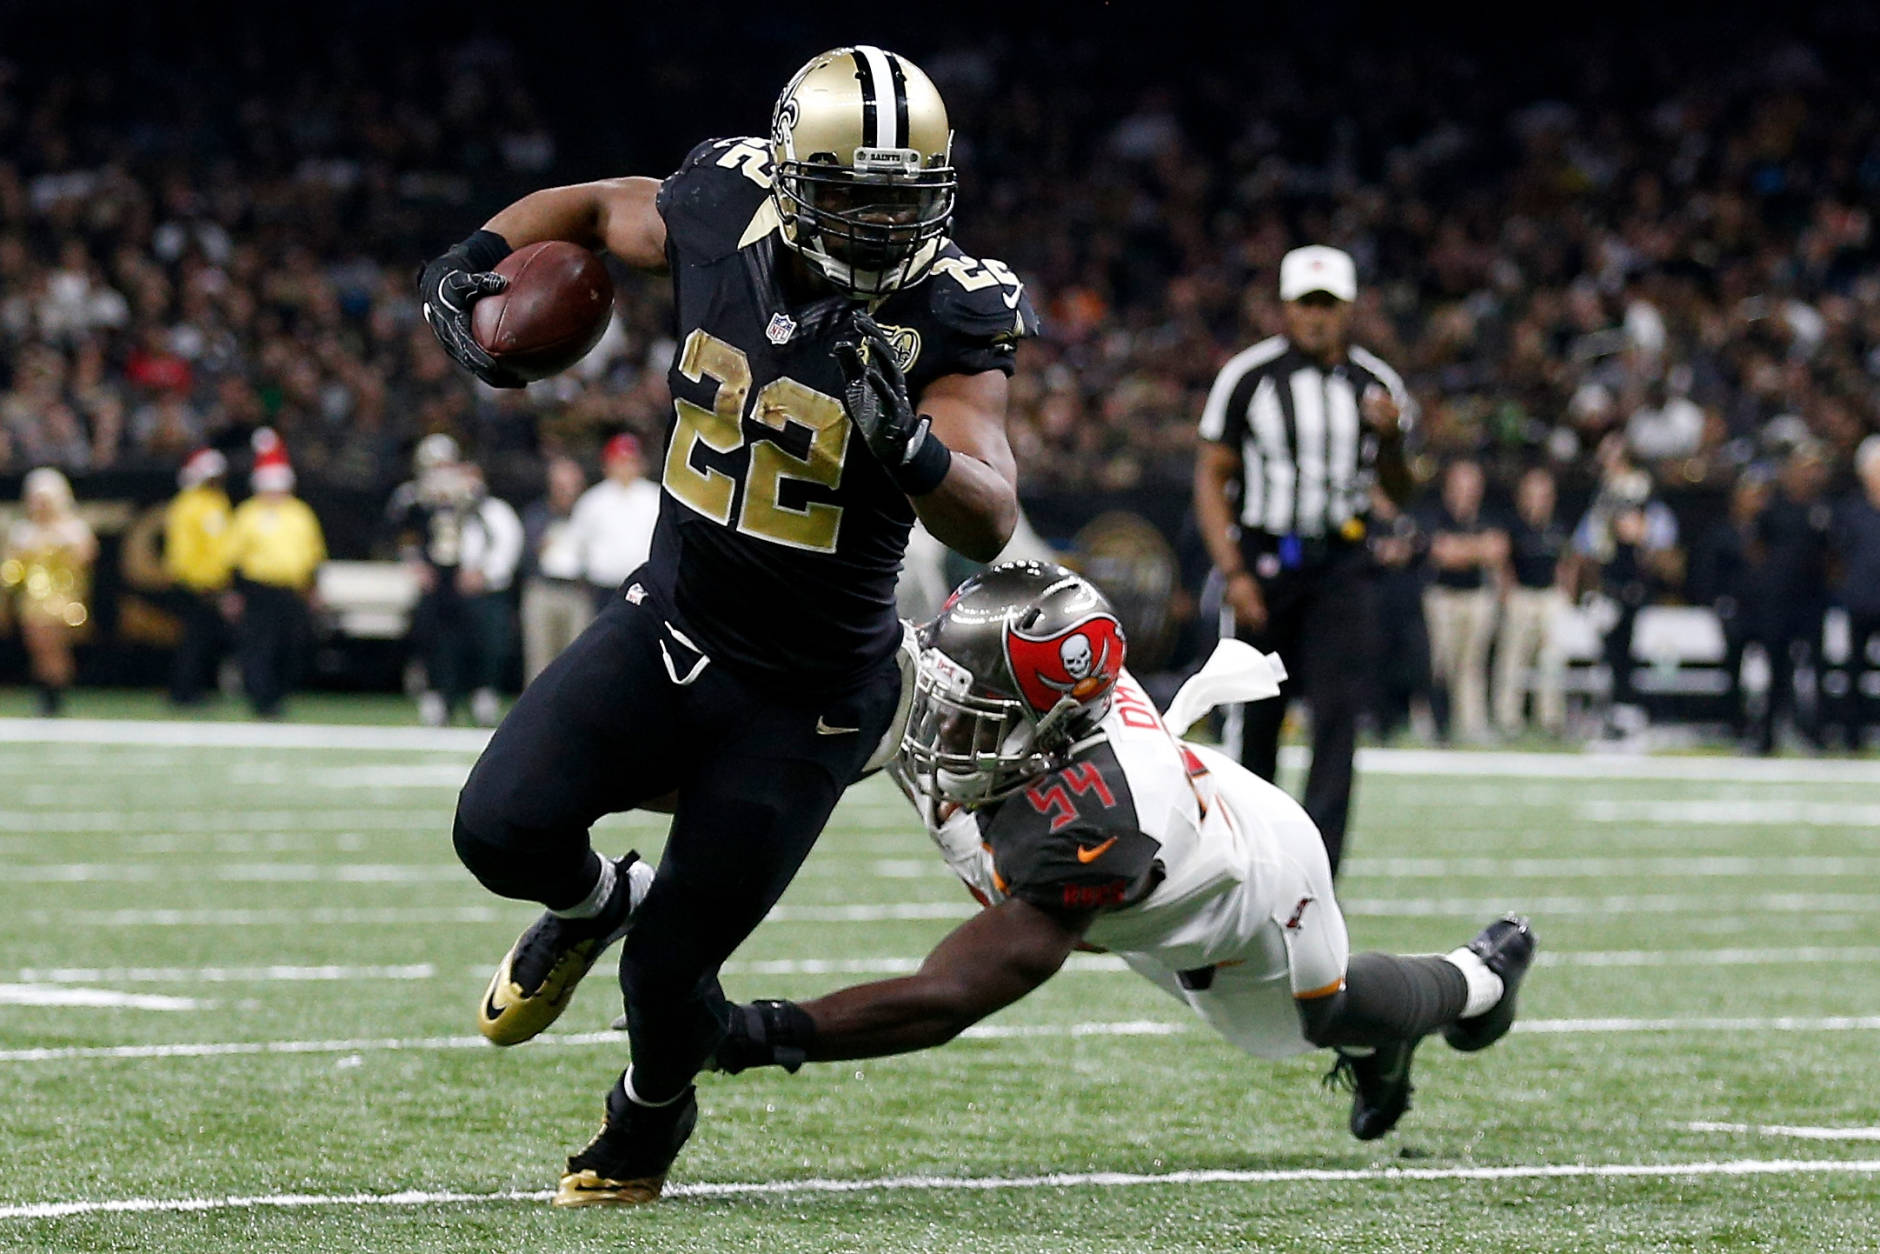 NEW ORLEANS, LA - DECEMBER 24:  Mark Ingram #22 of the New Orleans Saints is tackled by  Lavonte David #54 of the Tampa Bay Buccaneers at the Mercedes-Benz Superdome on December 24, 2016 in New Orleans, Louisiana.  (Photo by Jonathan Bachman/Getty Images)